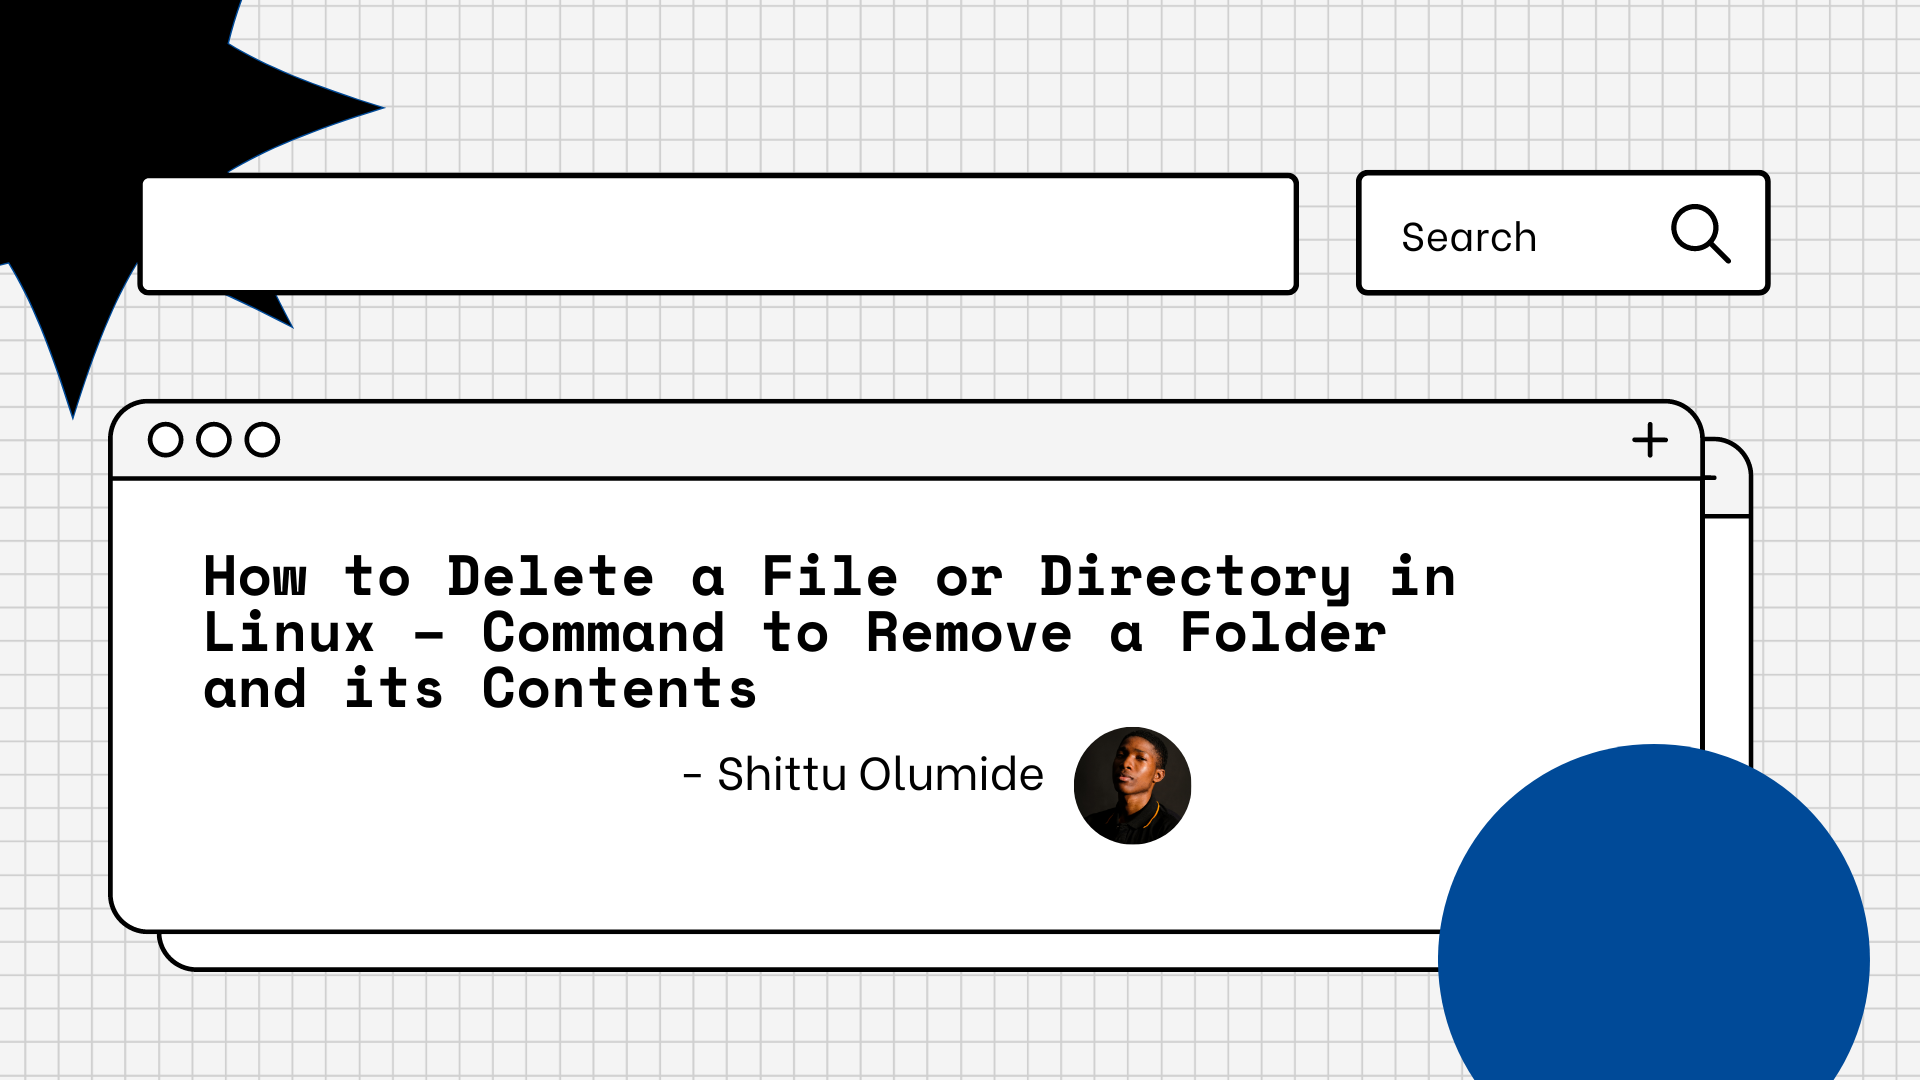 How to Delete a File or Directory in Linux – Command to Remove a Folder and its Contents